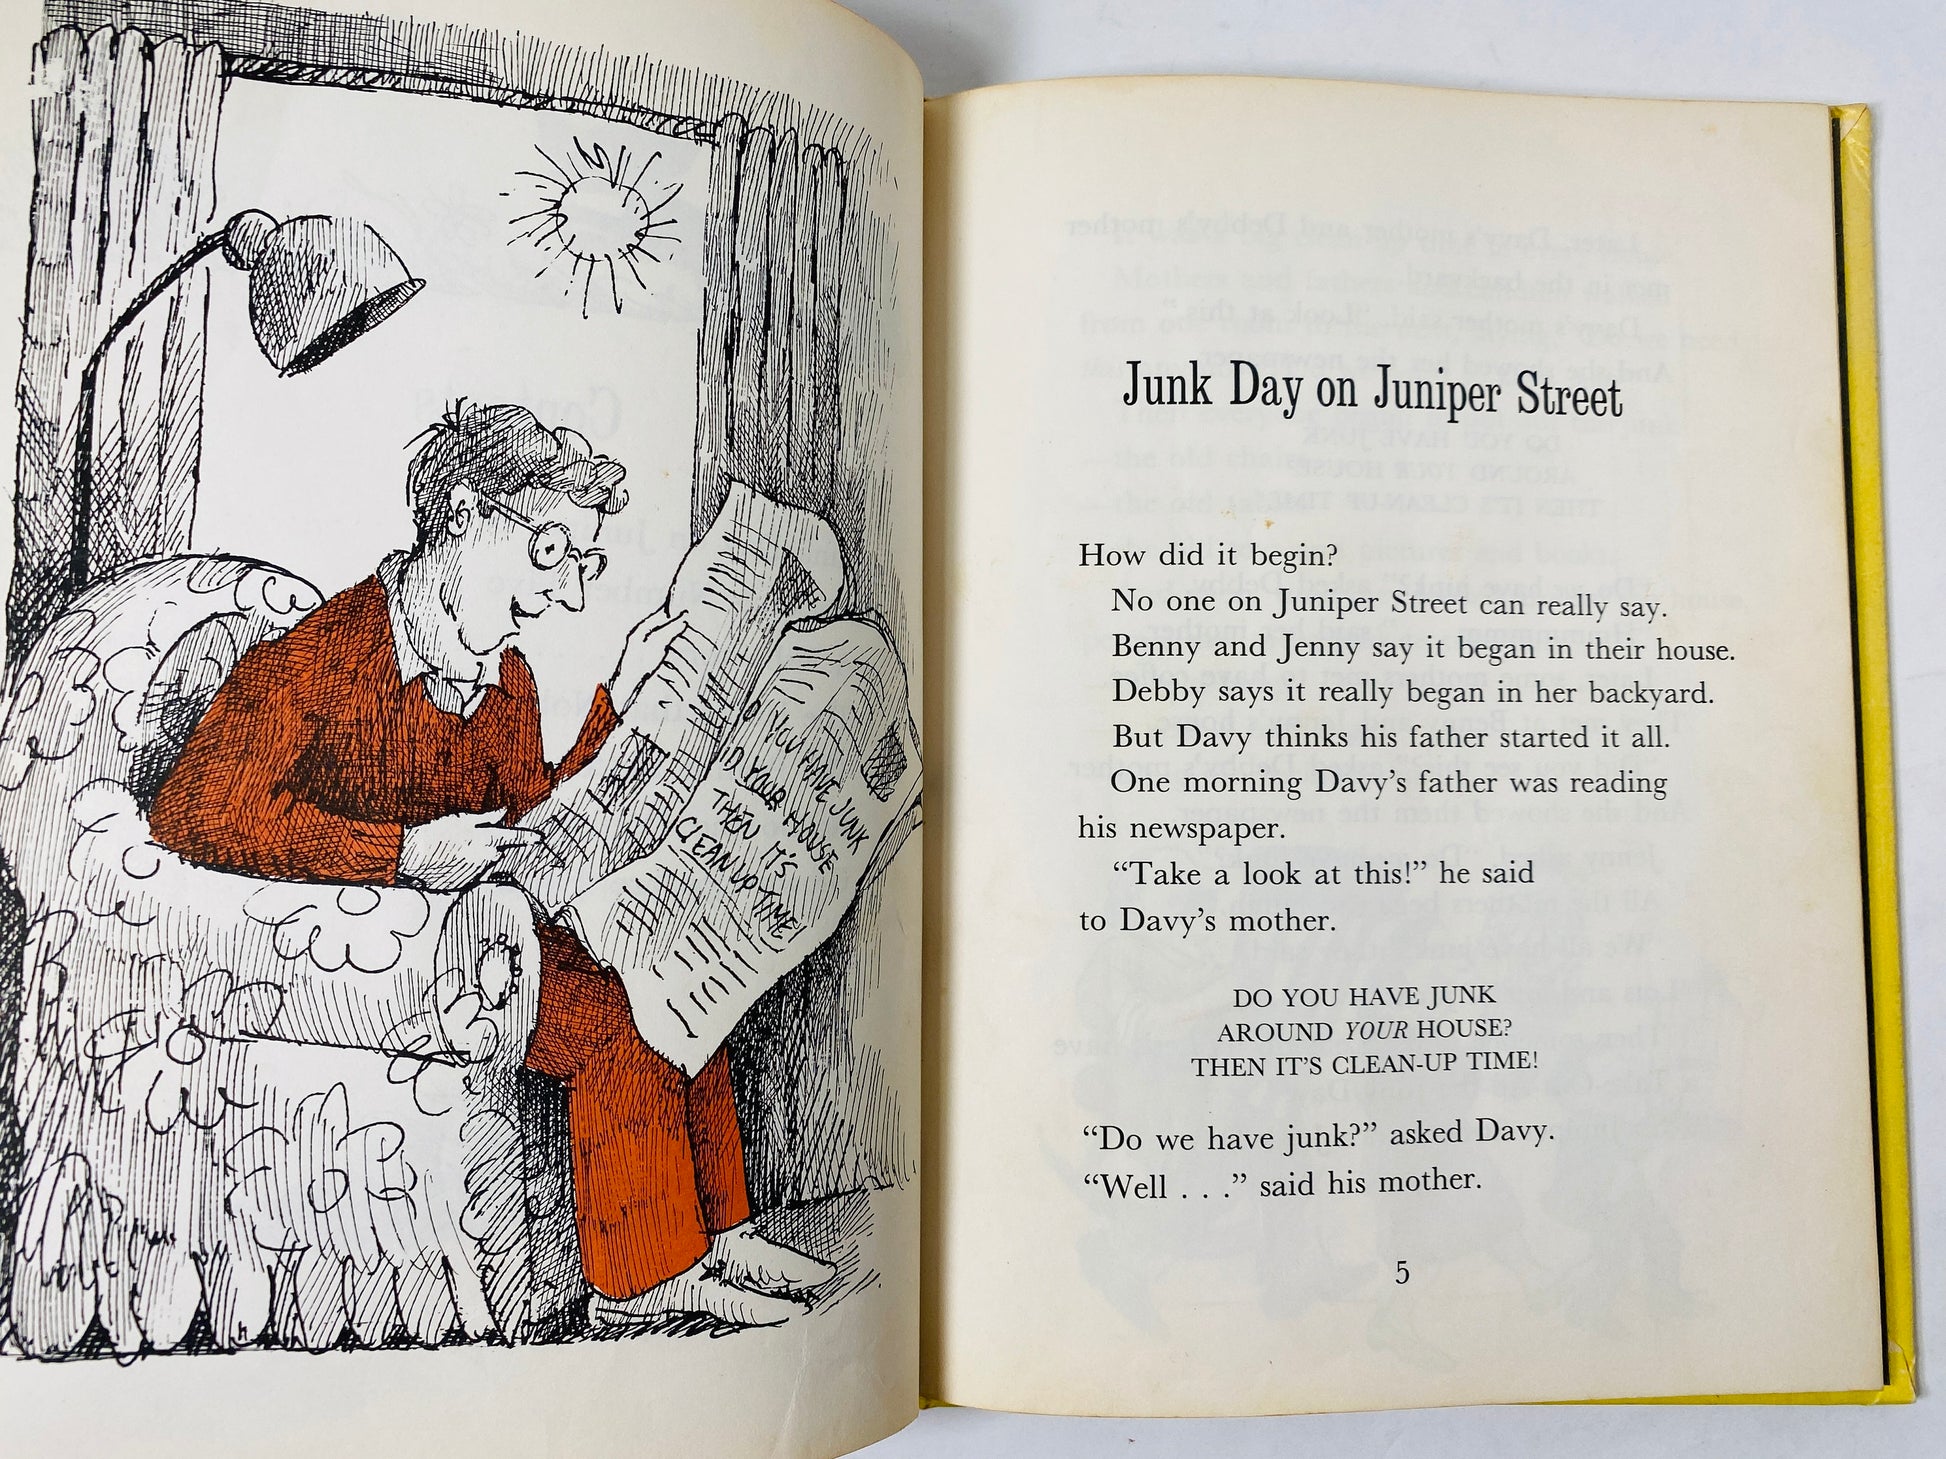 1969 Junk Day on Juniper Street Vintage Parent's Magazine Press children's book by Lillian Moore illustrated by Arnold Lobel